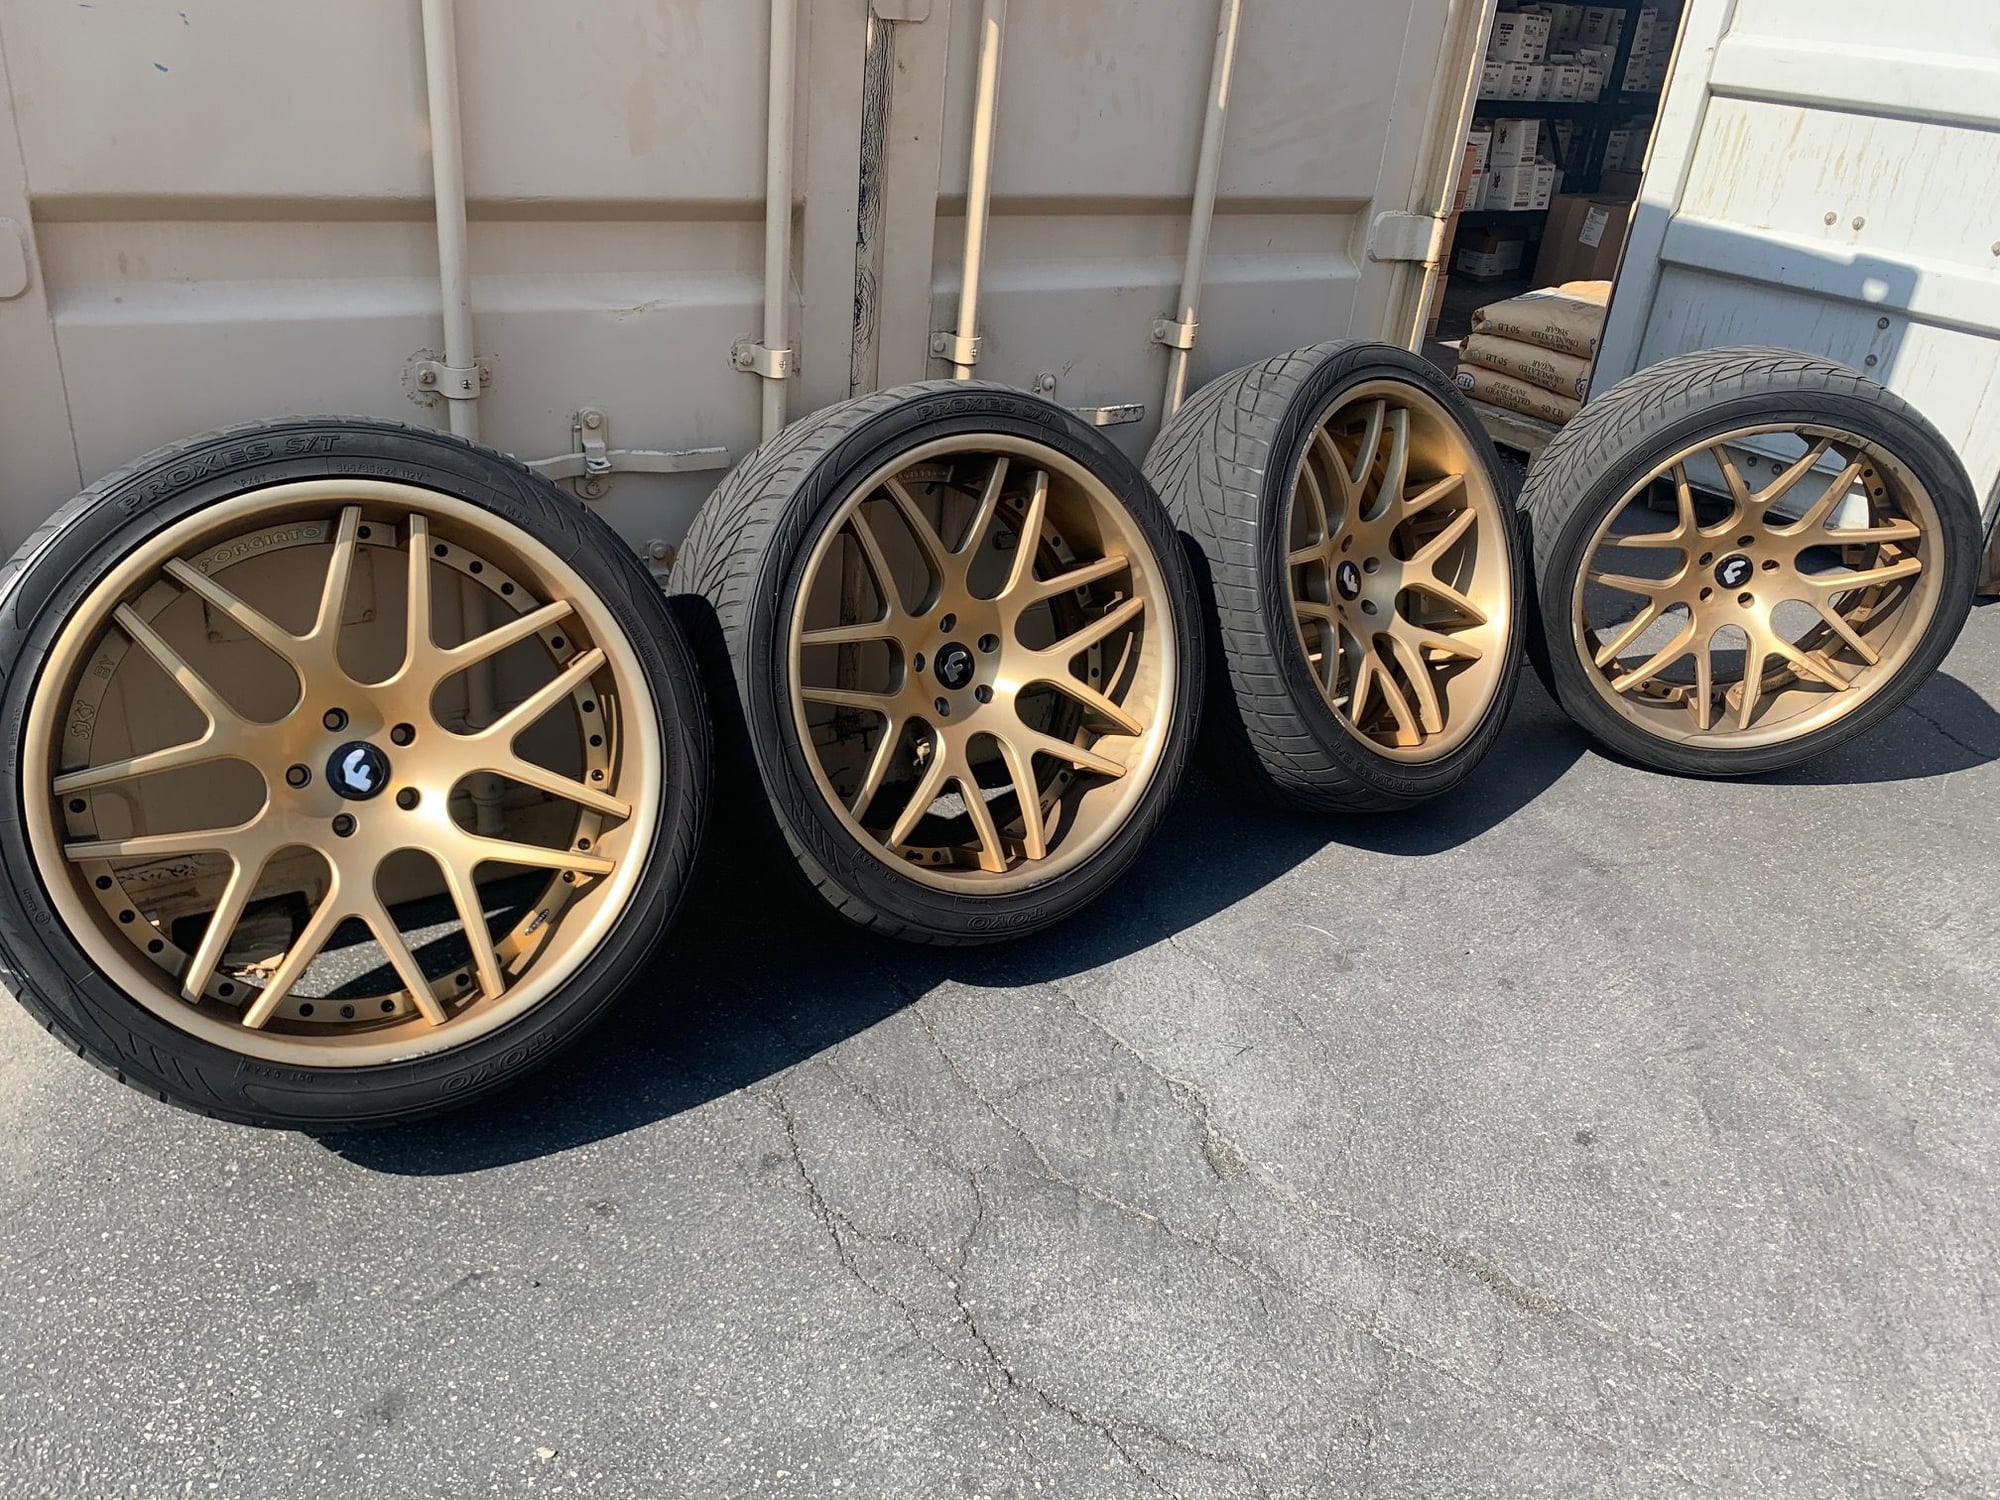 Wheels and Tires/Axles - 24' Forgiato S202 wheels for G63 W461, W463 - Used - 2015 to 2019 Mercedes-Benz G63 AMG - Calabasas, CA 91301, United States